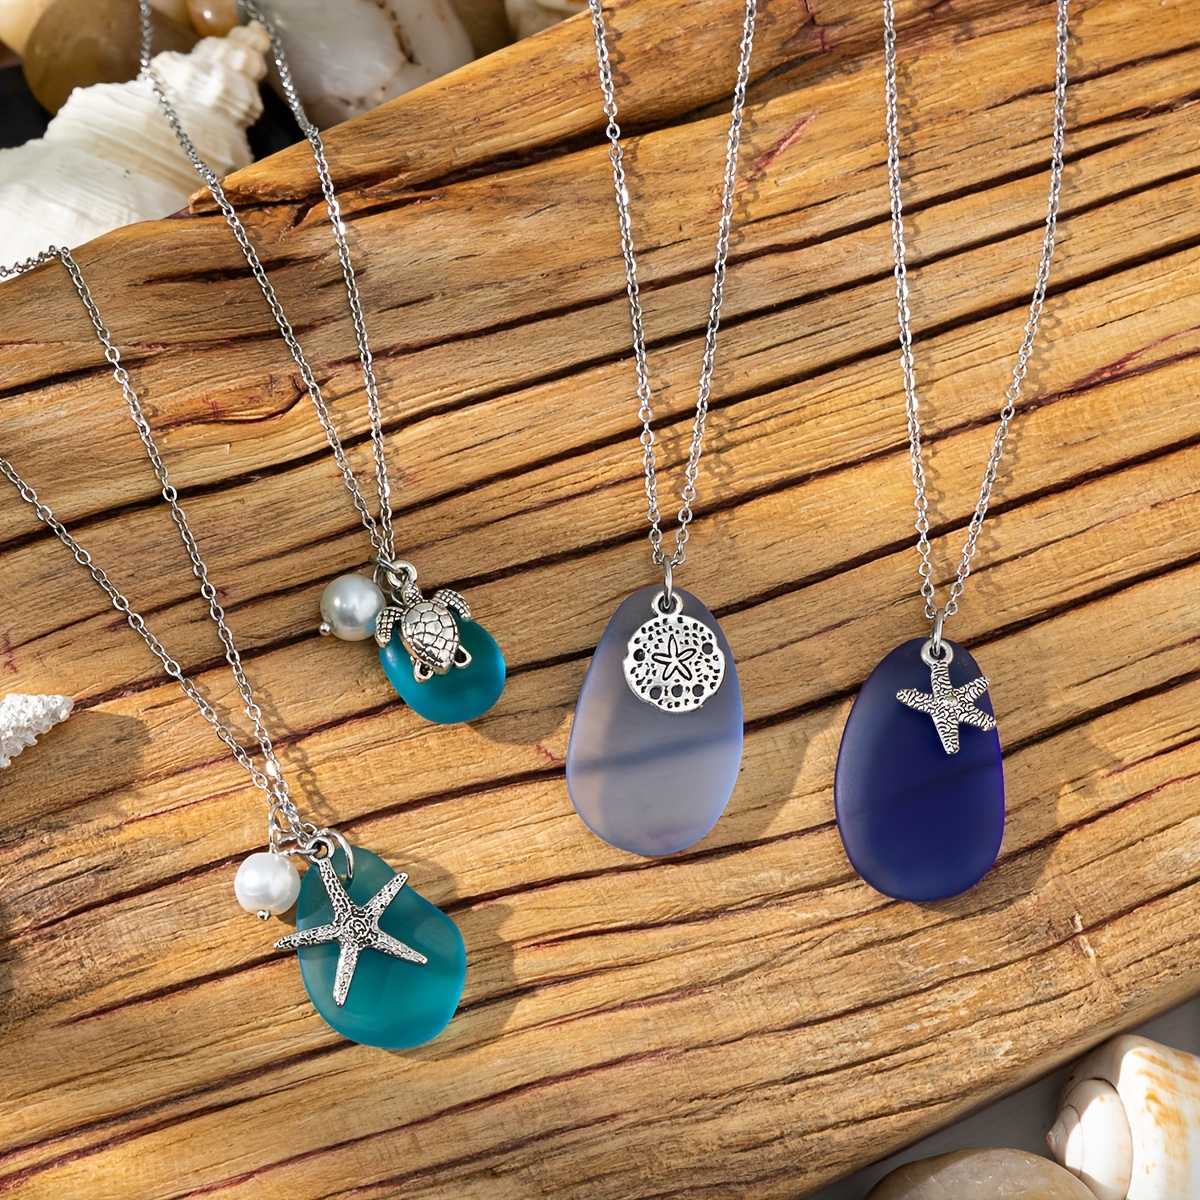 

Boho-chic Sea Glass Pendant Necklace With Starfish & Turtle Charms - Perfect For Beach Vacations, All-season Wear